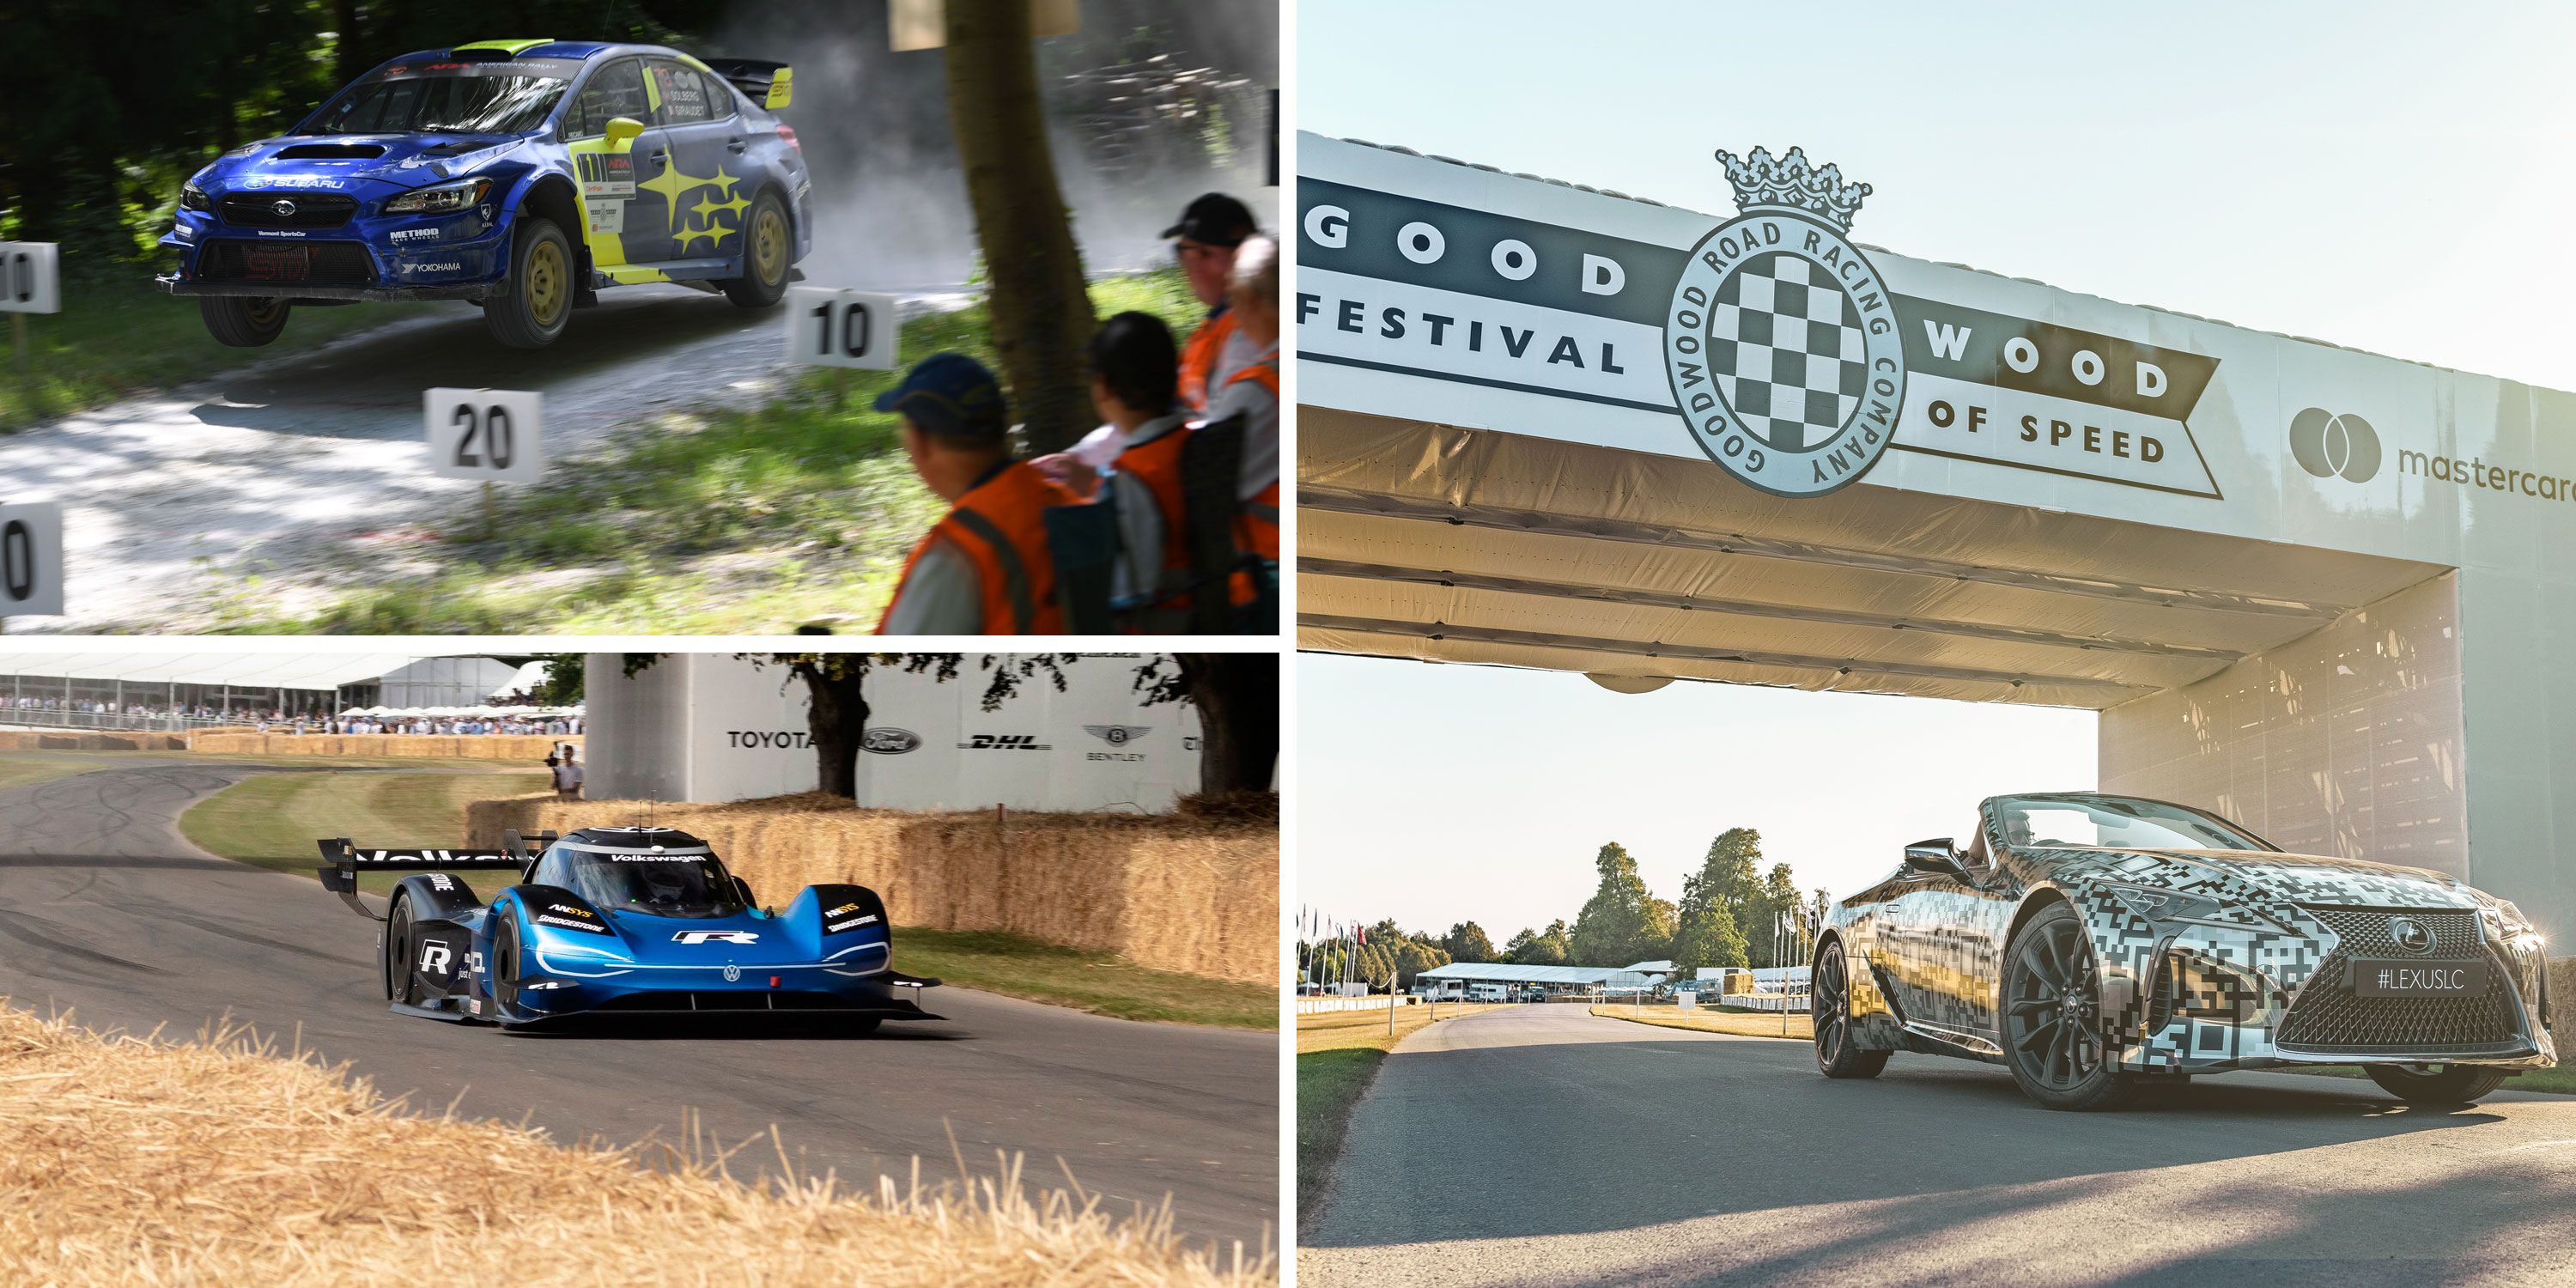 2019 Goodwood Festival of Speed – The Coolest Stuff That Happened